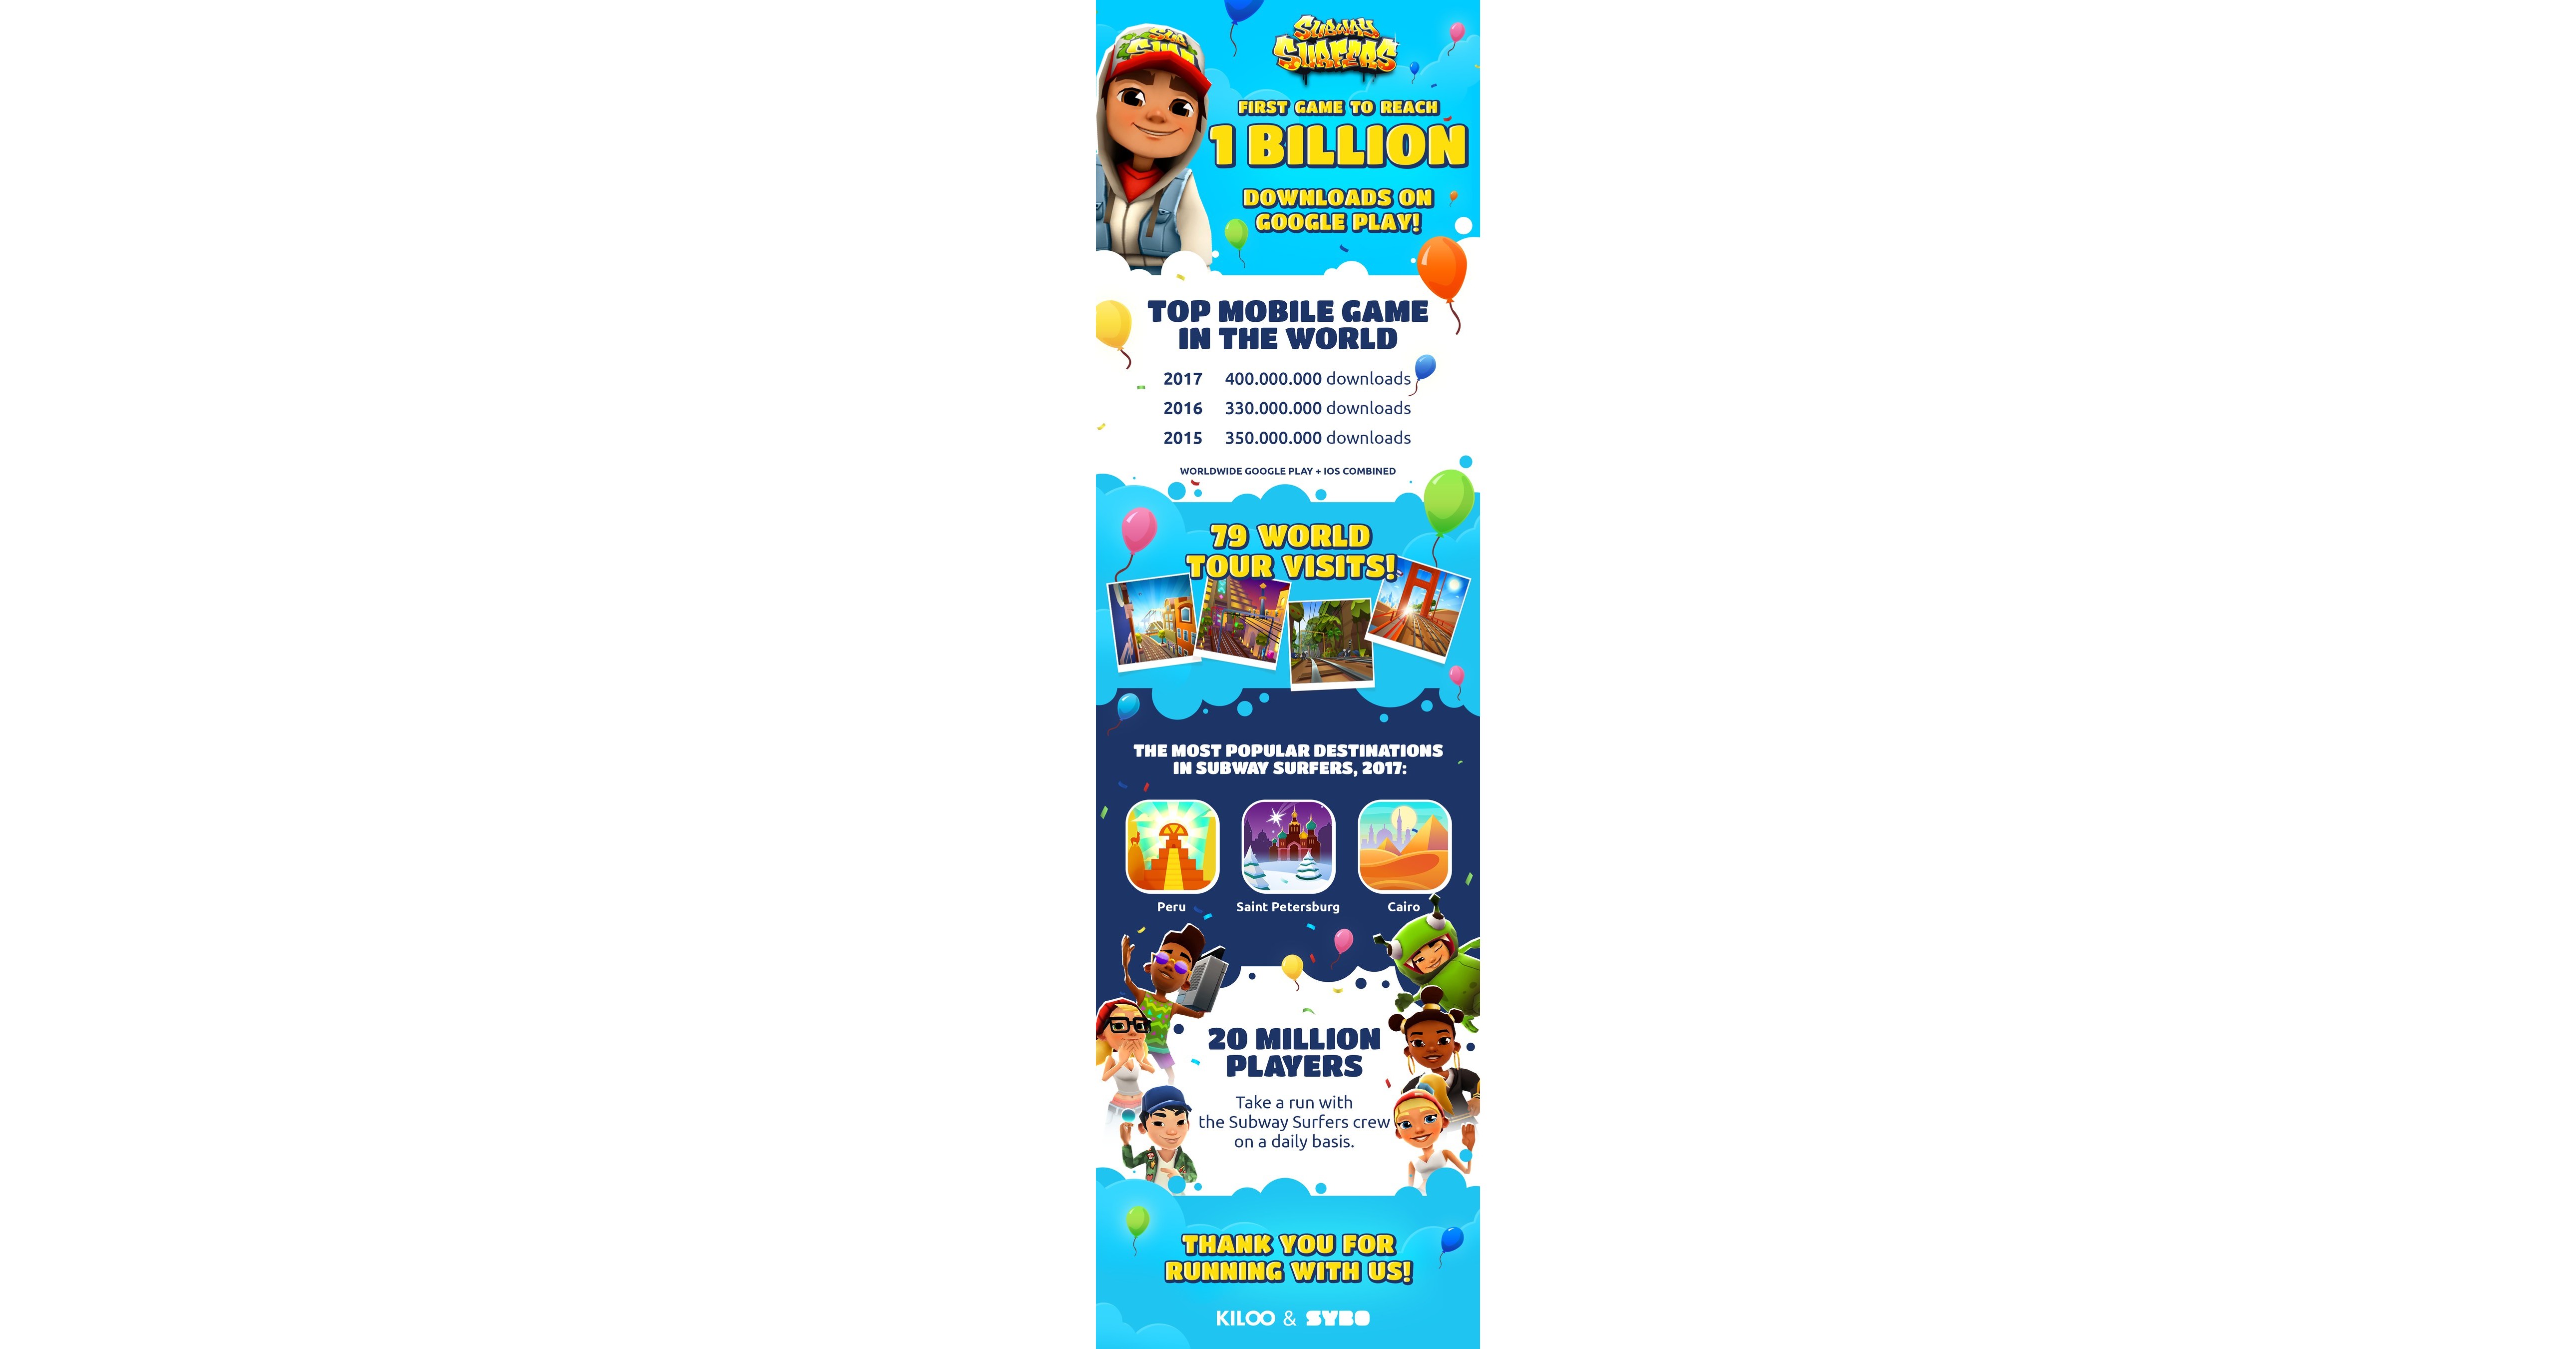 Subway Surfers is the Most Downloaded Mobile Game of the Decade